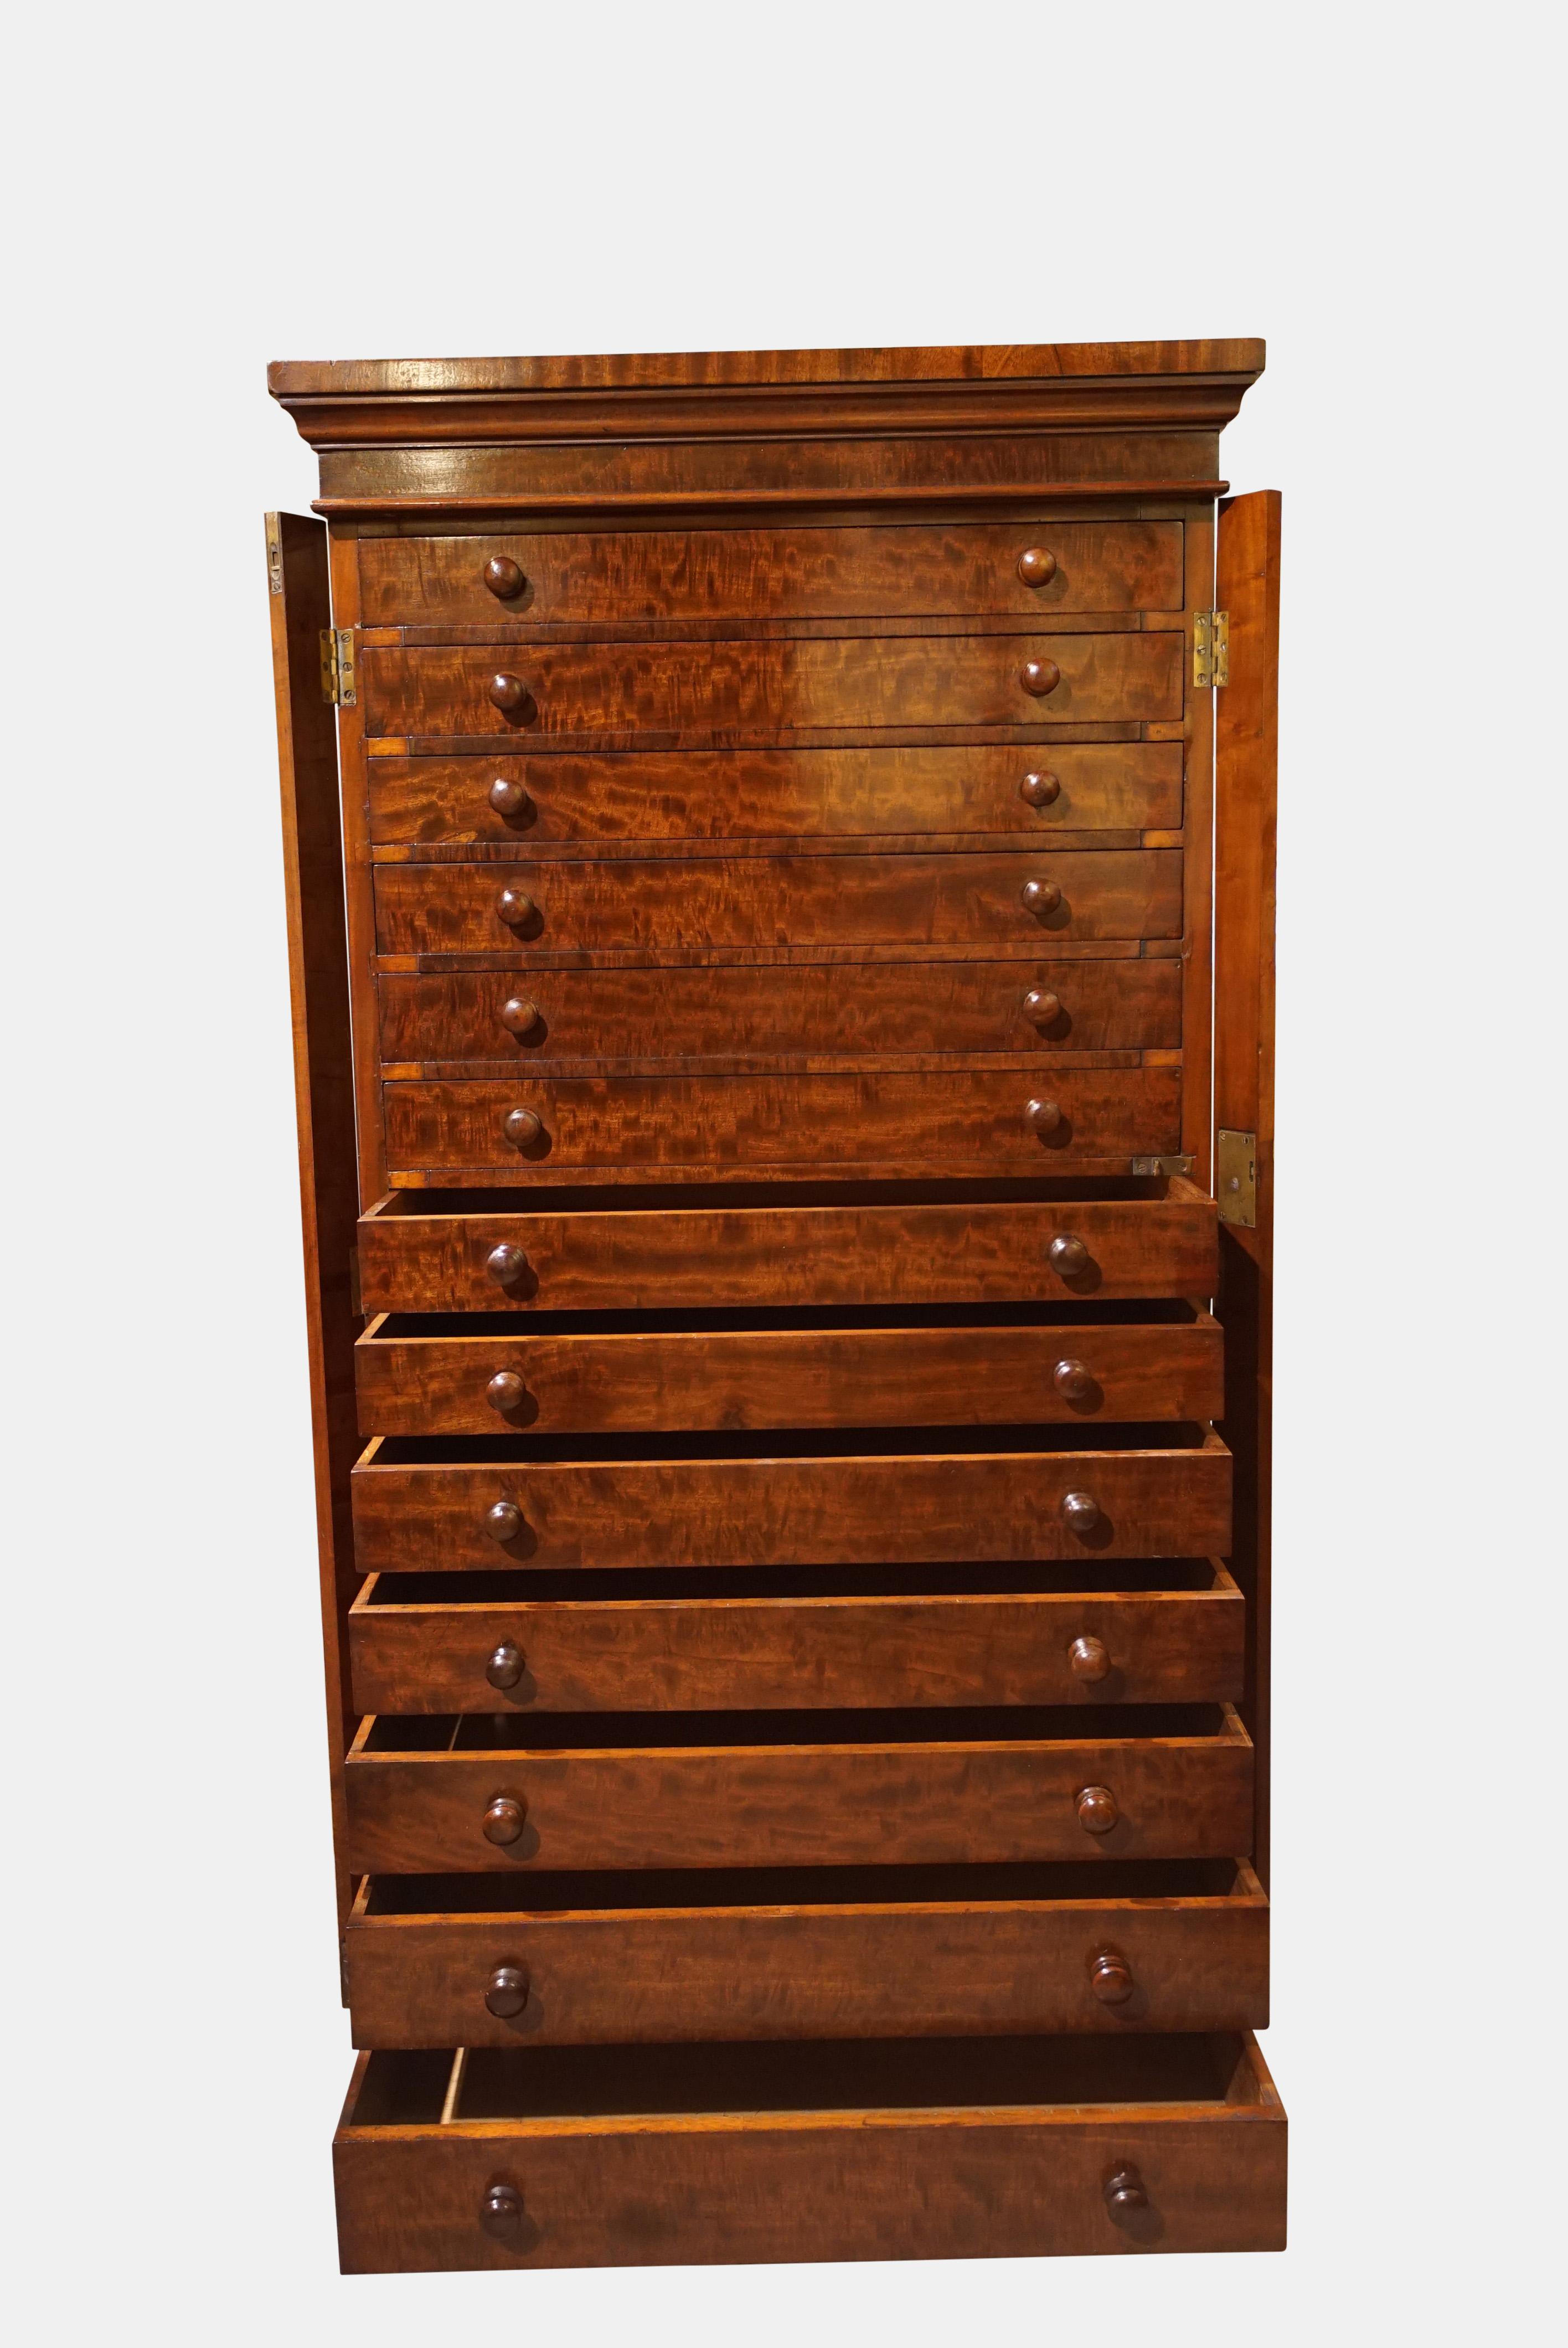 A superb William IV fiddleback mahogany Wellington chest of 13 drawers - Probably a collectors cabinet,

circa 1835.